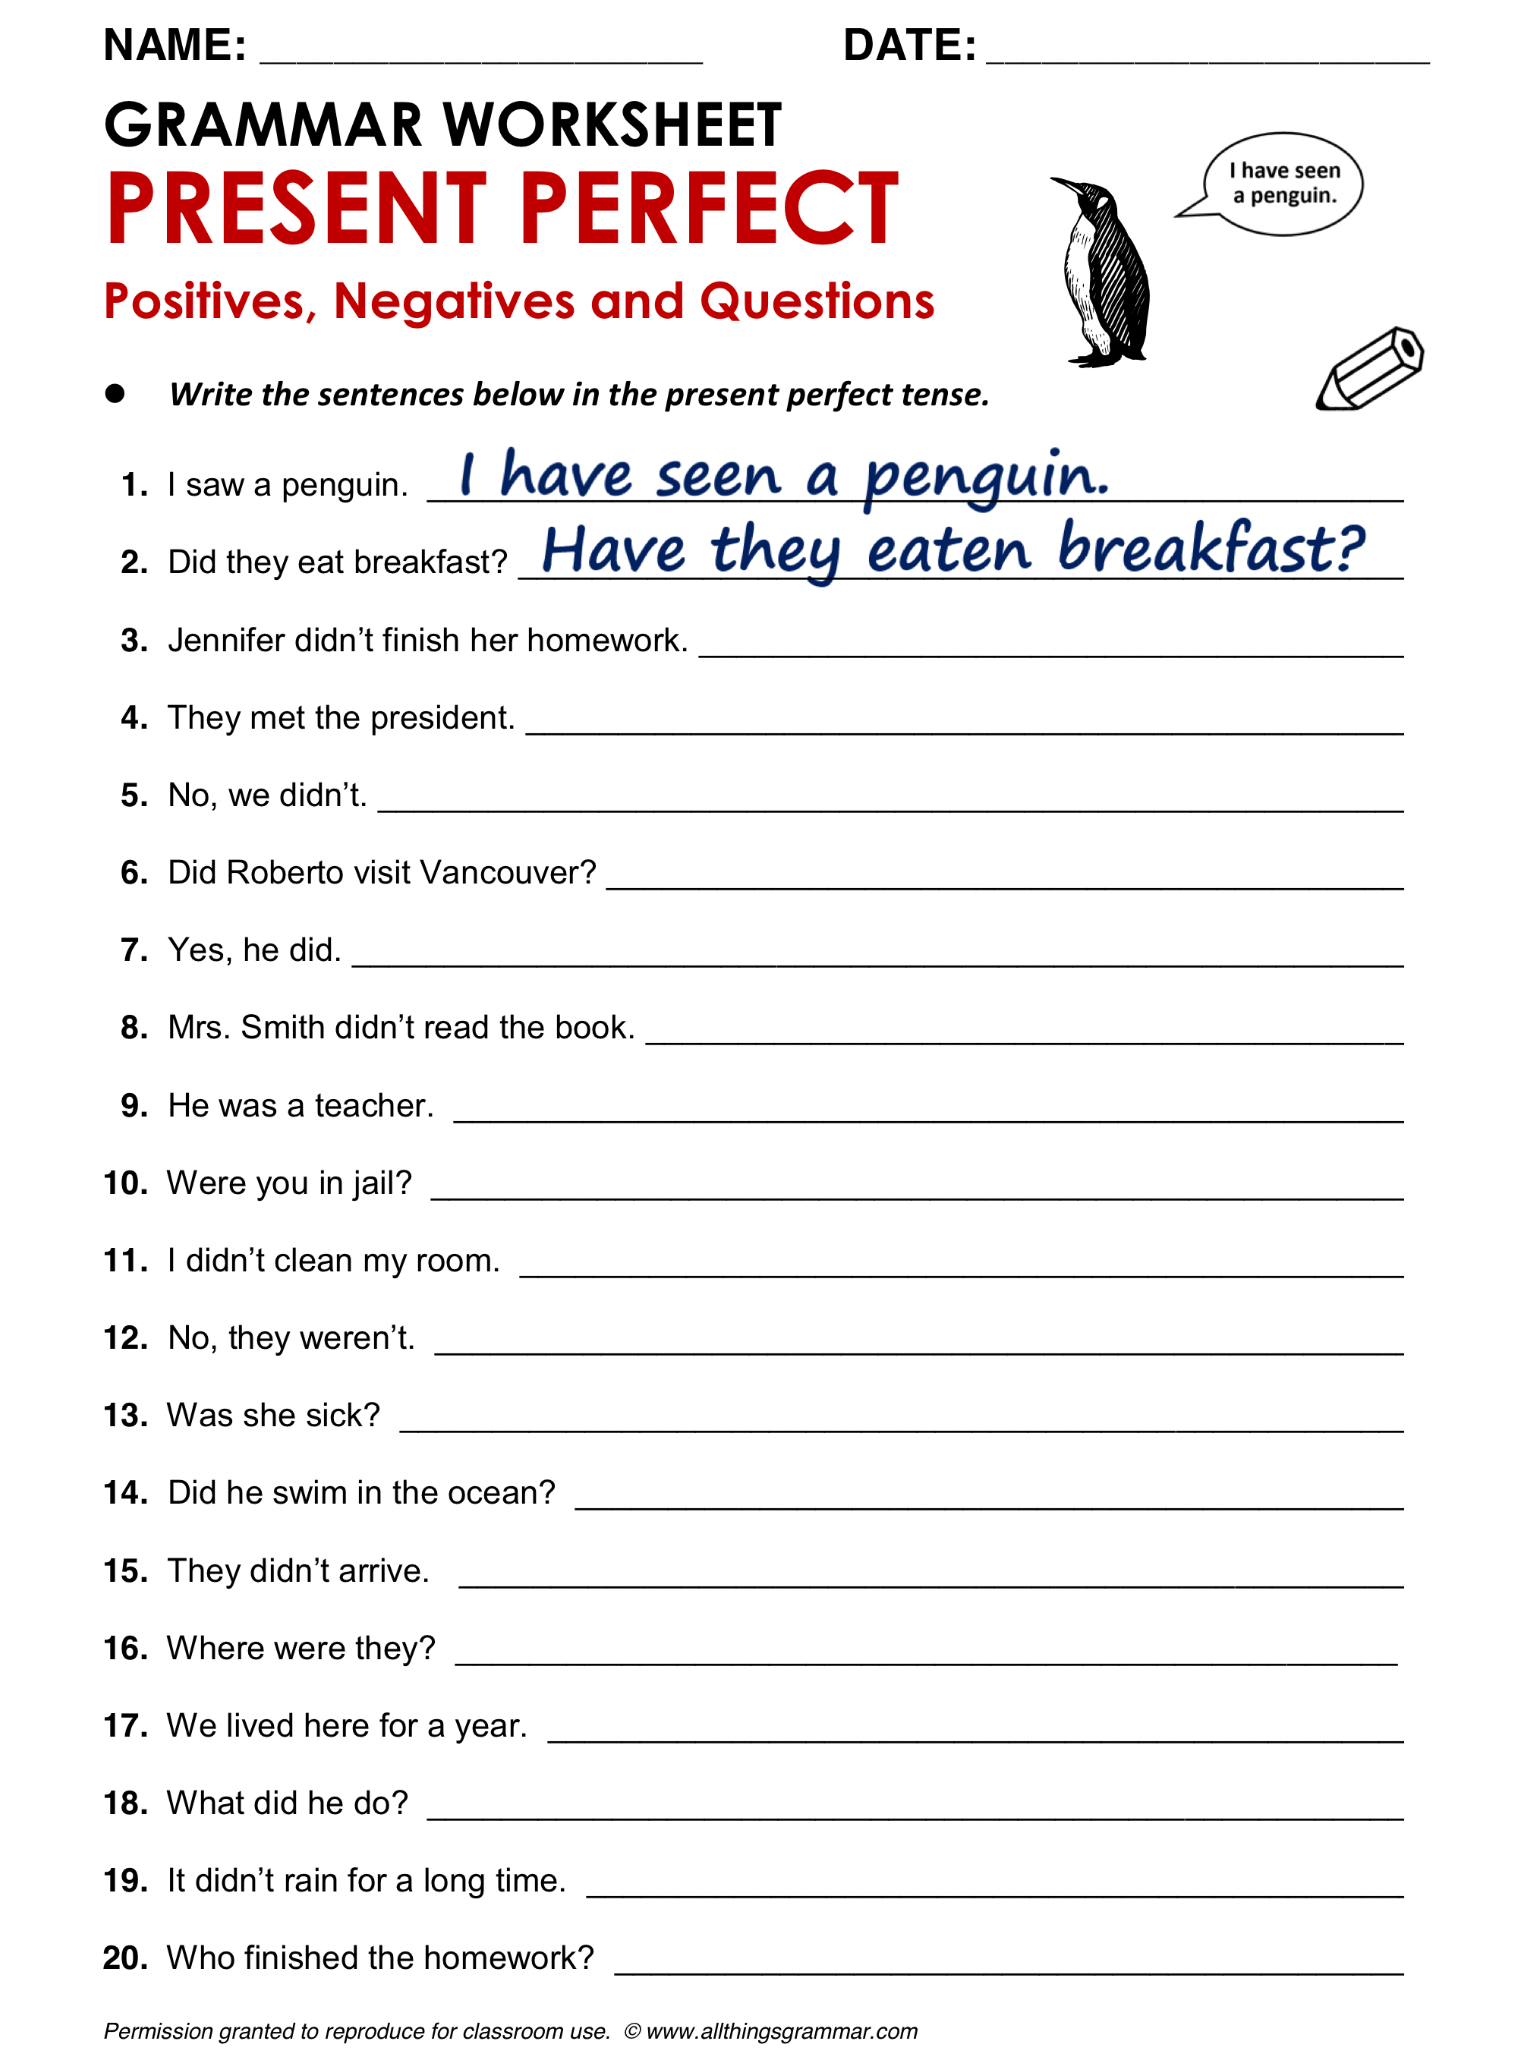 Present Tense And Present Perfect Tense Worksheets